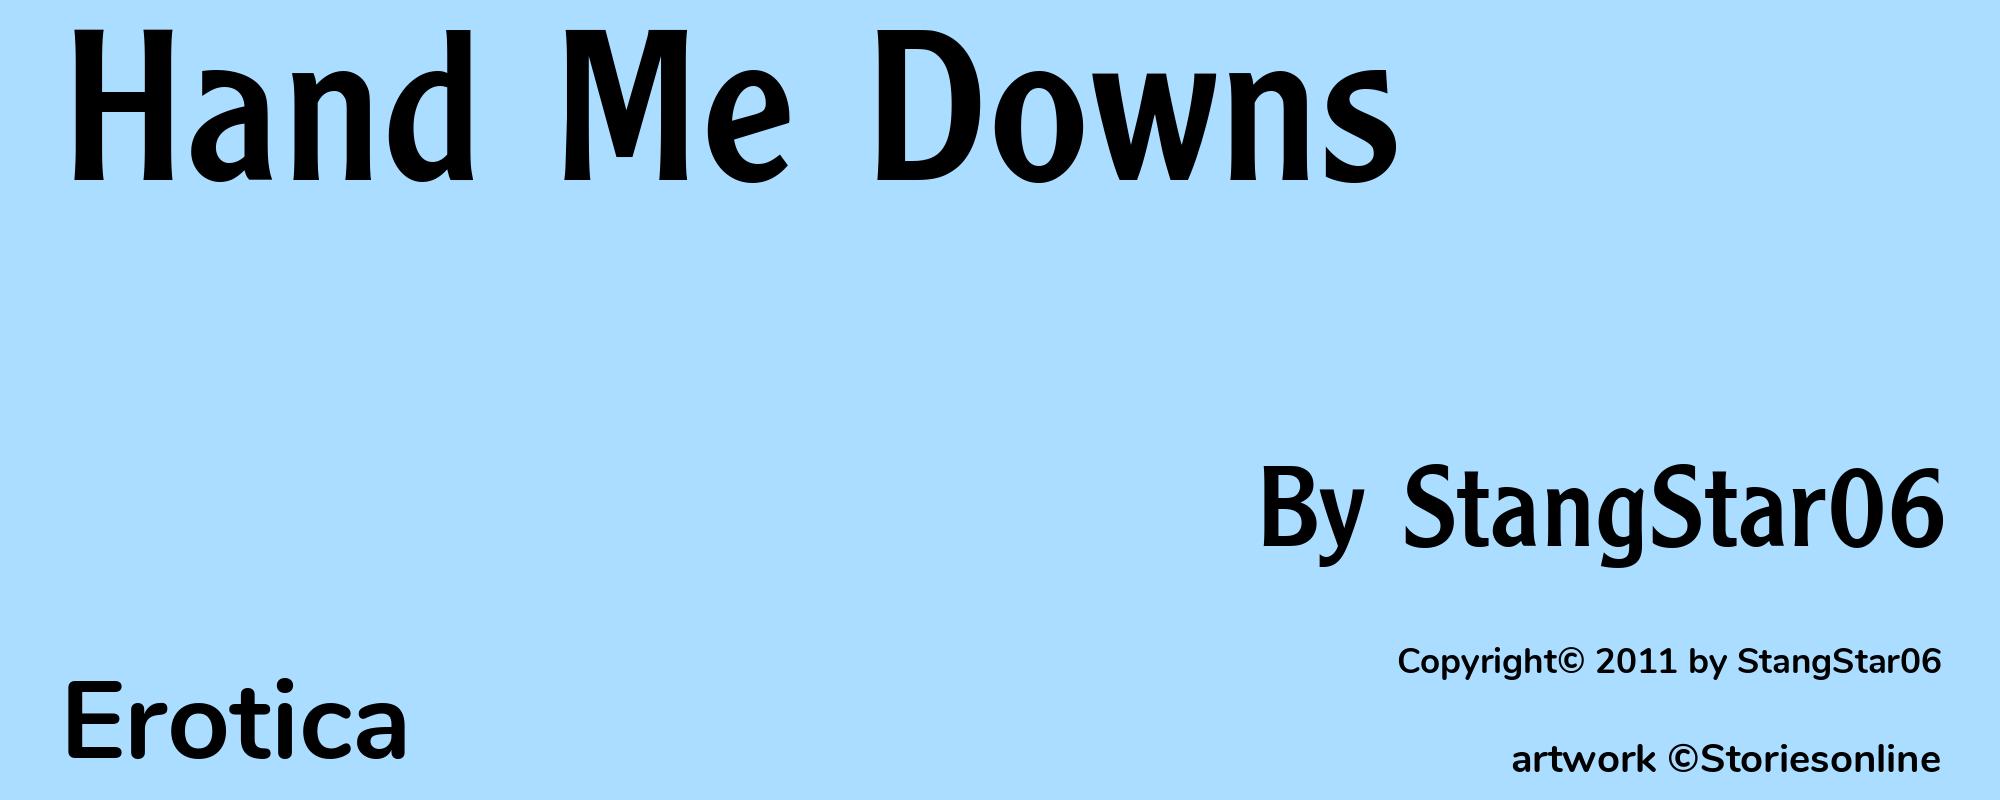 Hand Me Downs - Cover